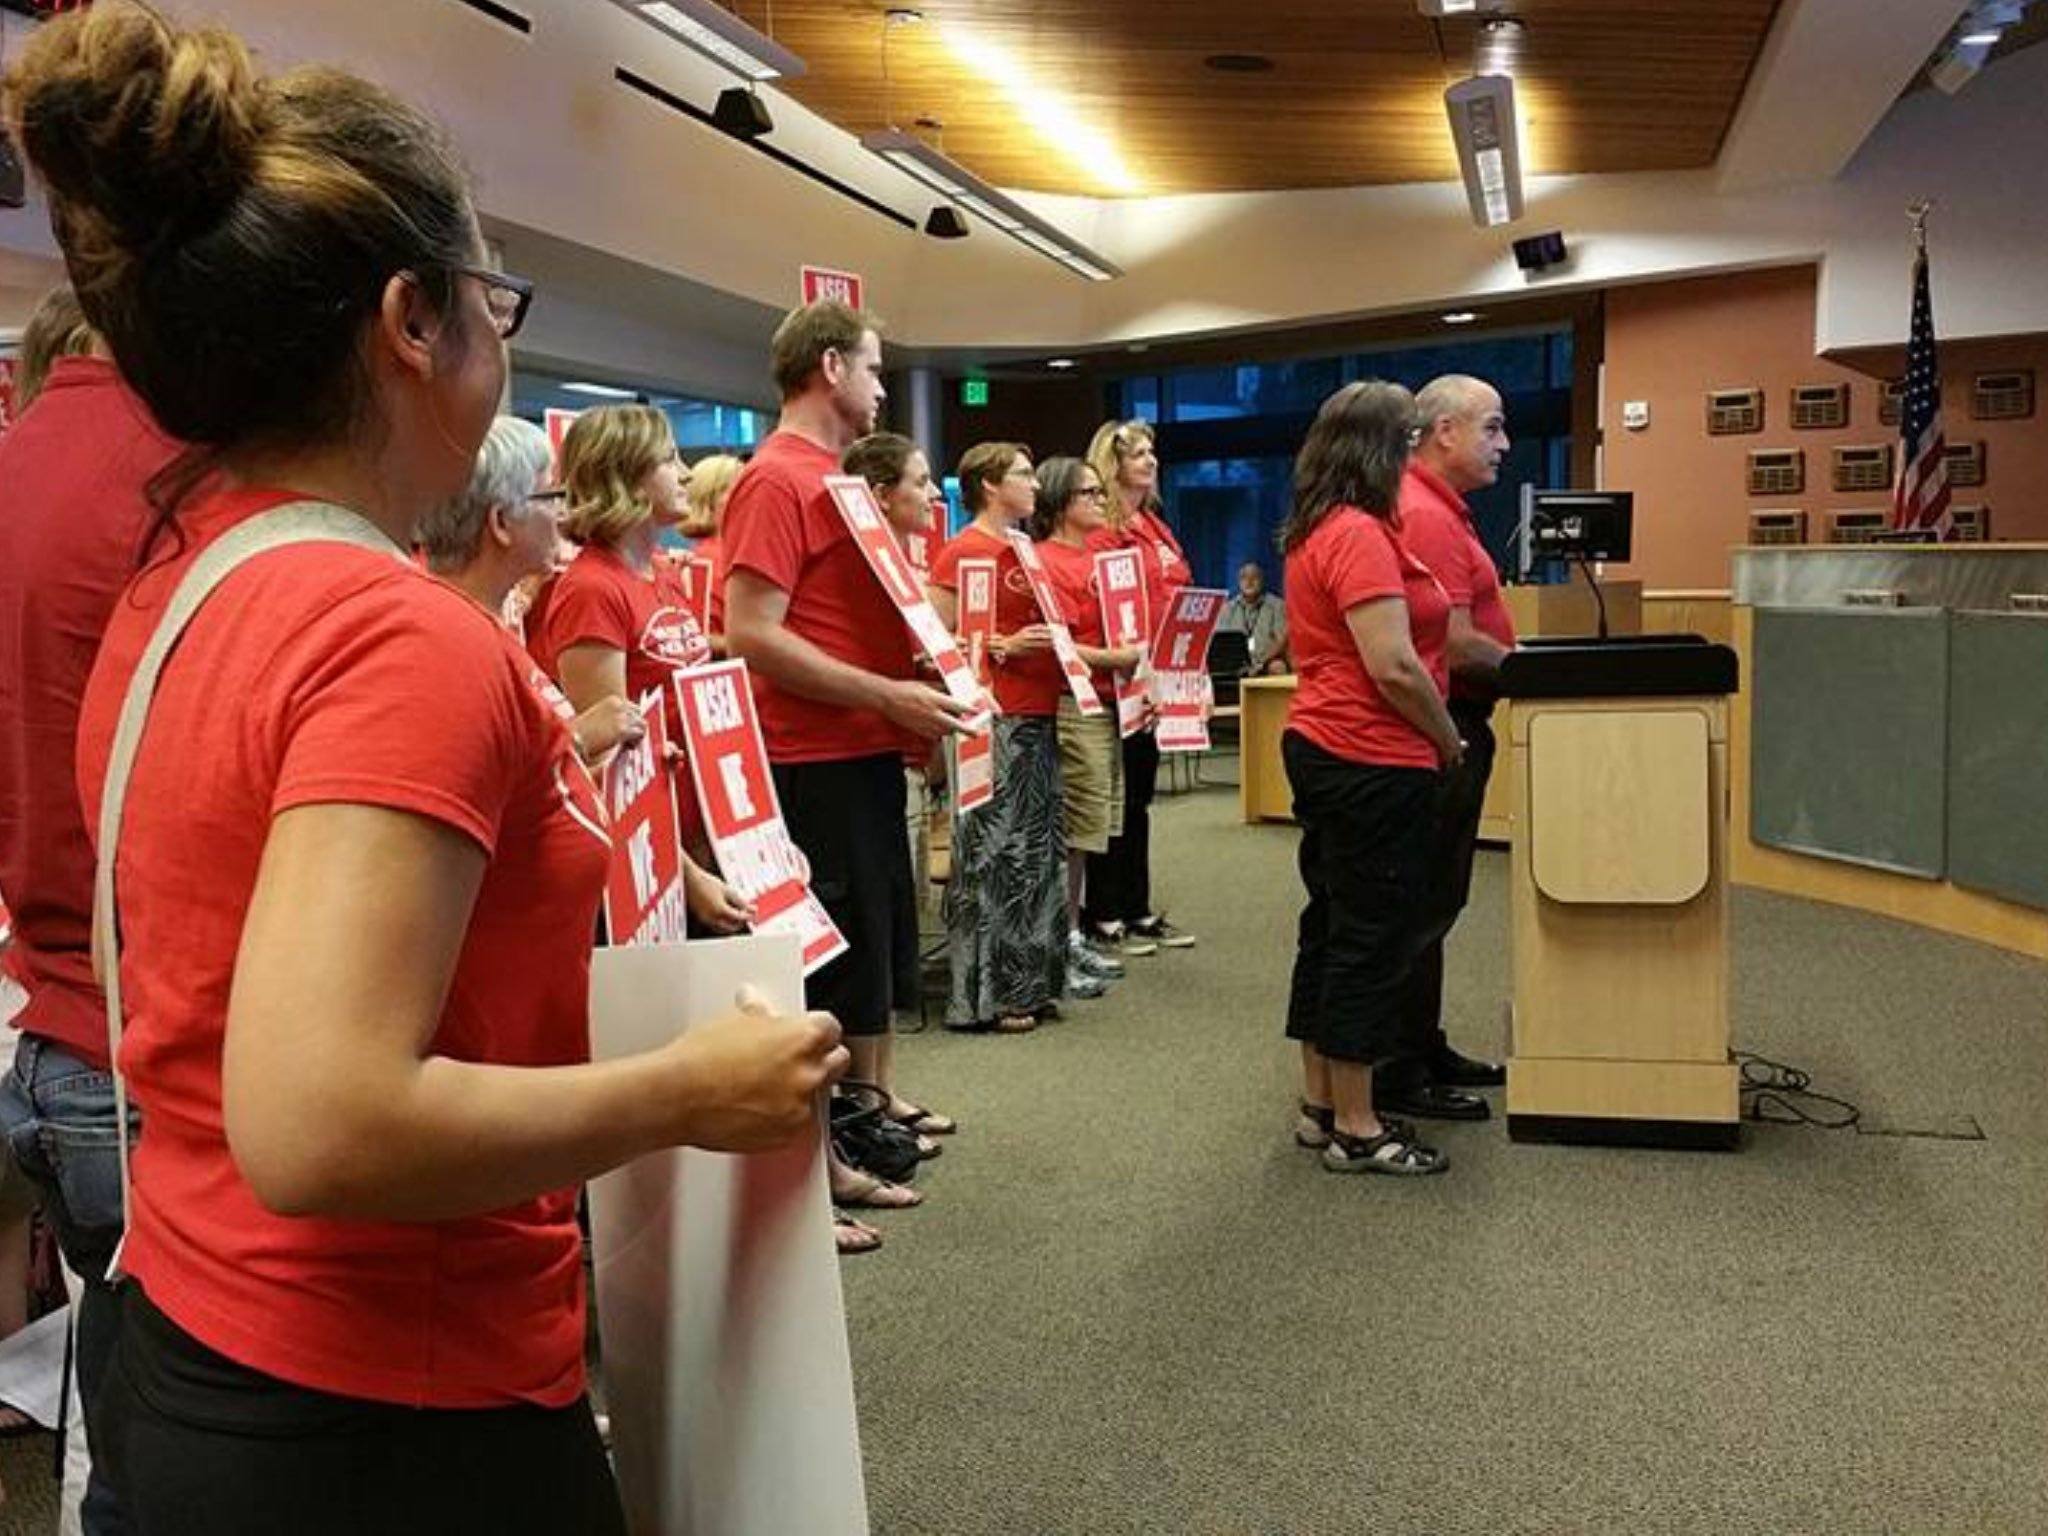 Union members pack a board meeting on Tuesday